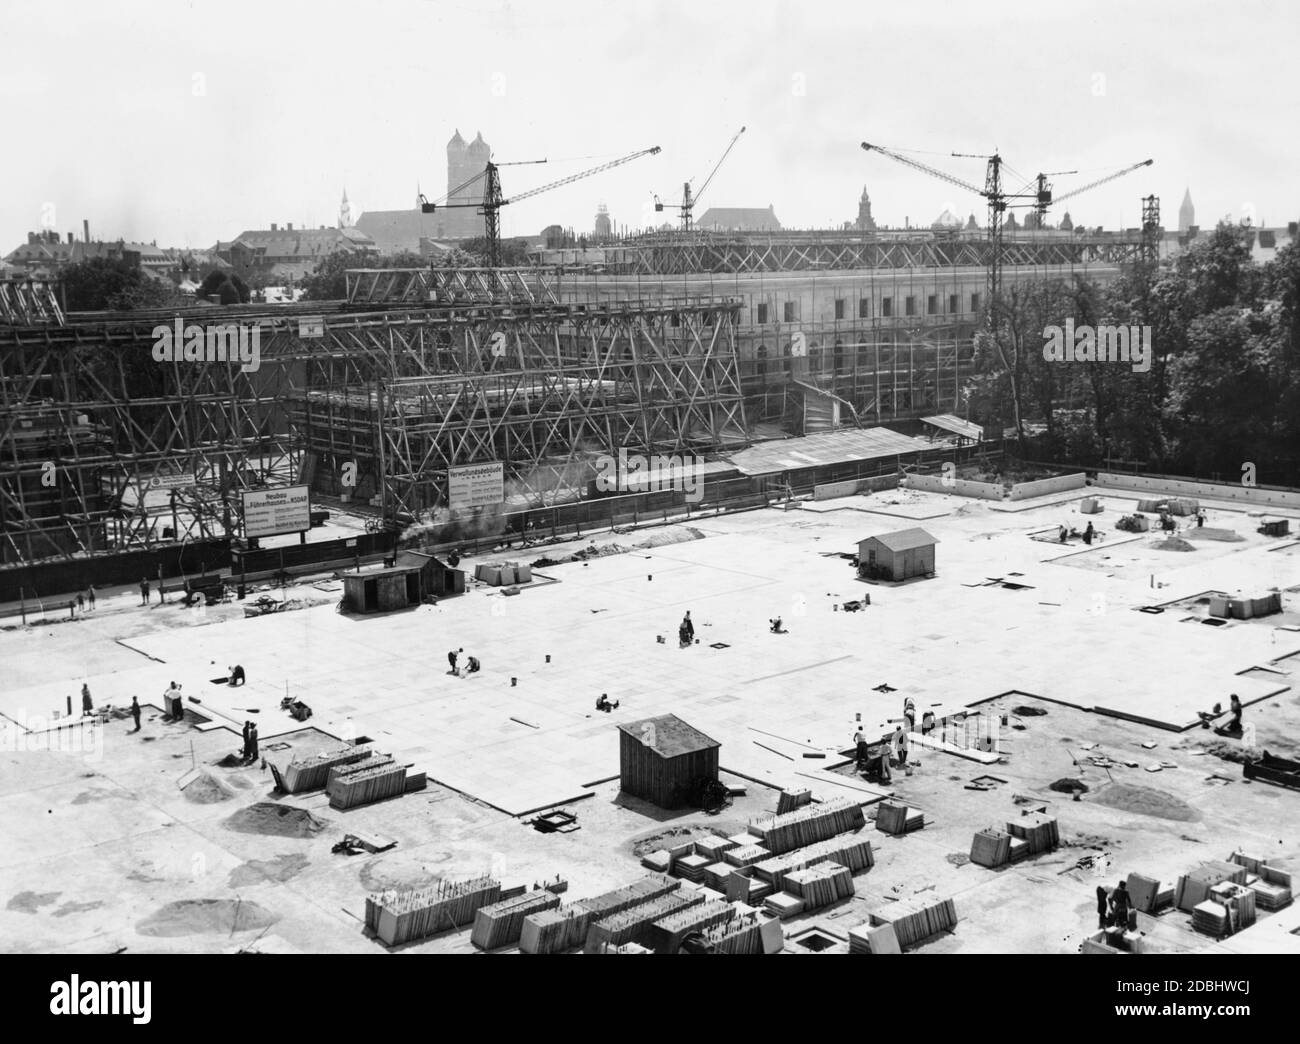 In the foreground the laying of stone slabs on the Koenigsplatz. On the left, the construction of the Ehrentempel (Temple of Honour) for the National Socialists killed in the Beer Hall Putsch. And in the back right, the construction of the administration building of the NSDAP. At the back in the middle, the Frauenkirche. Stock Photo